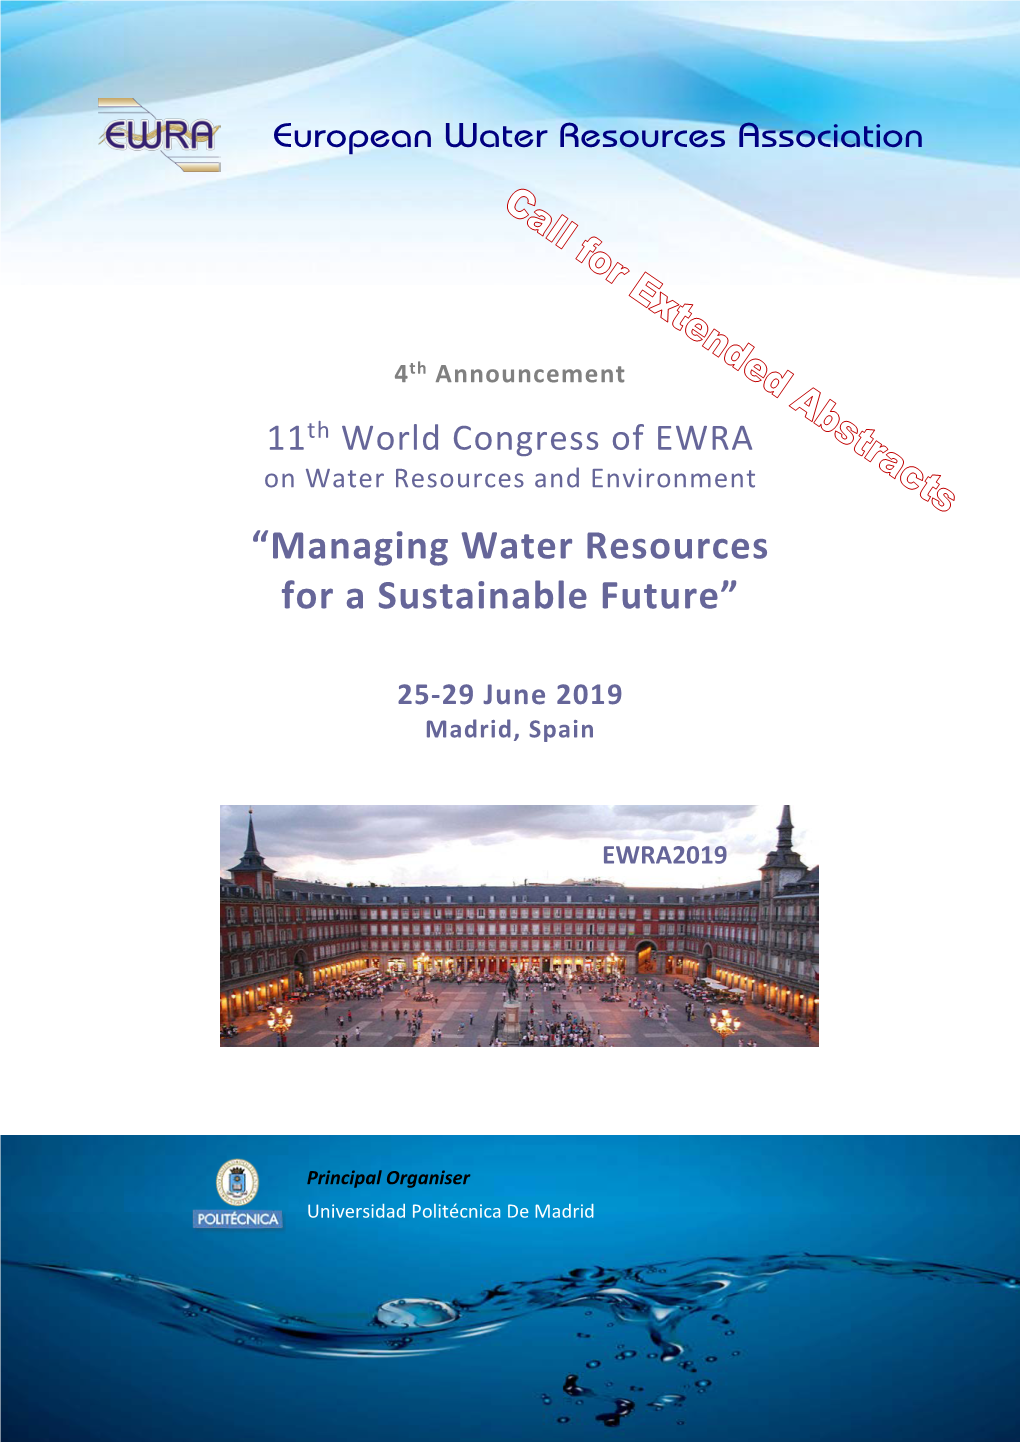 “Managing Water Resources for a Sustainable Future”